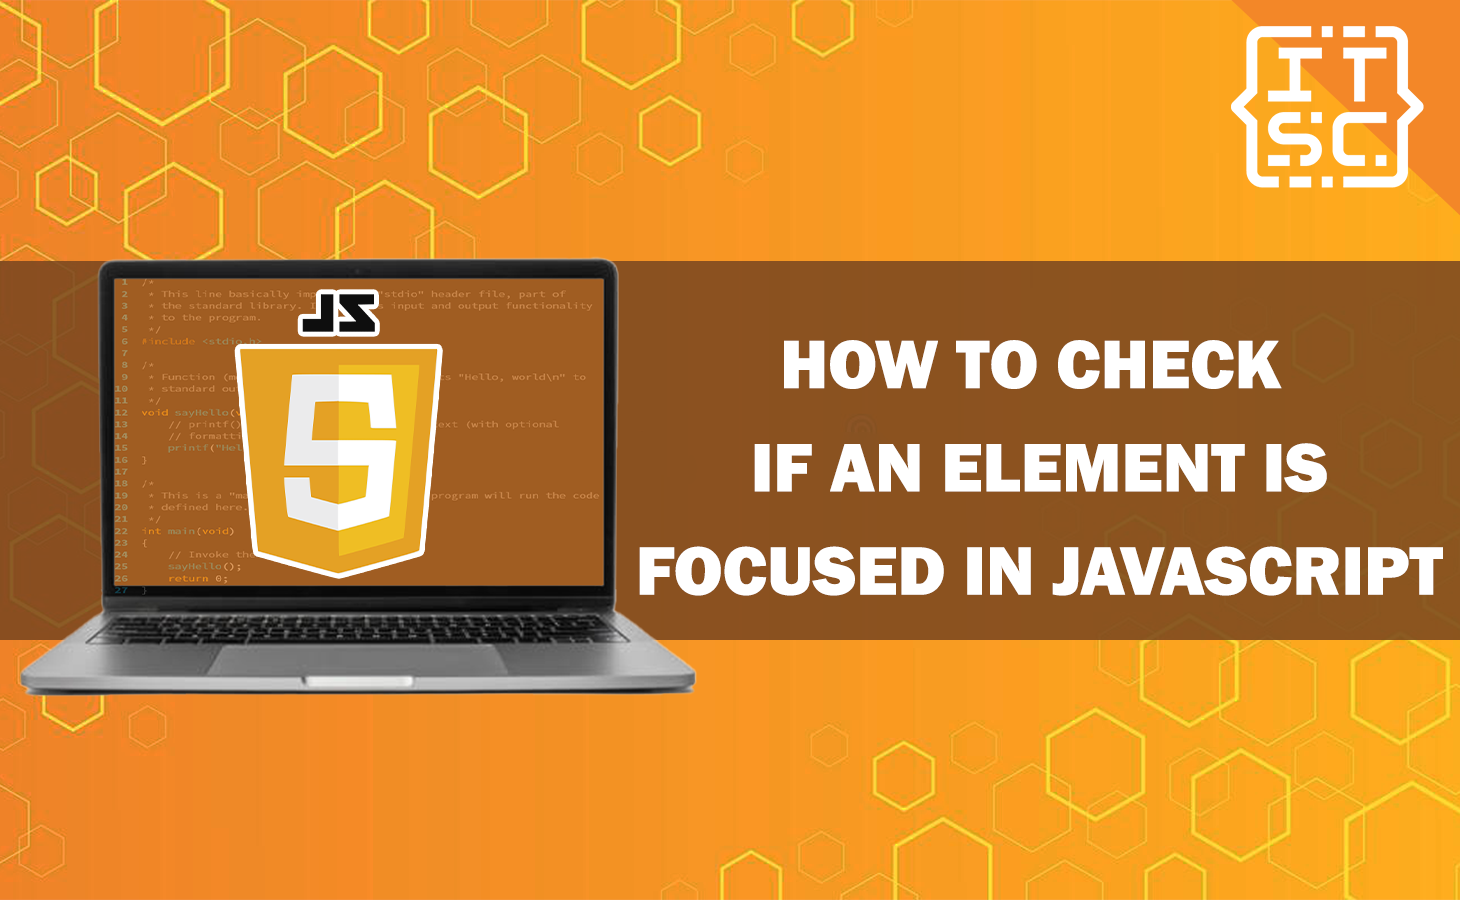 How to check if an element is focused in JavaScript